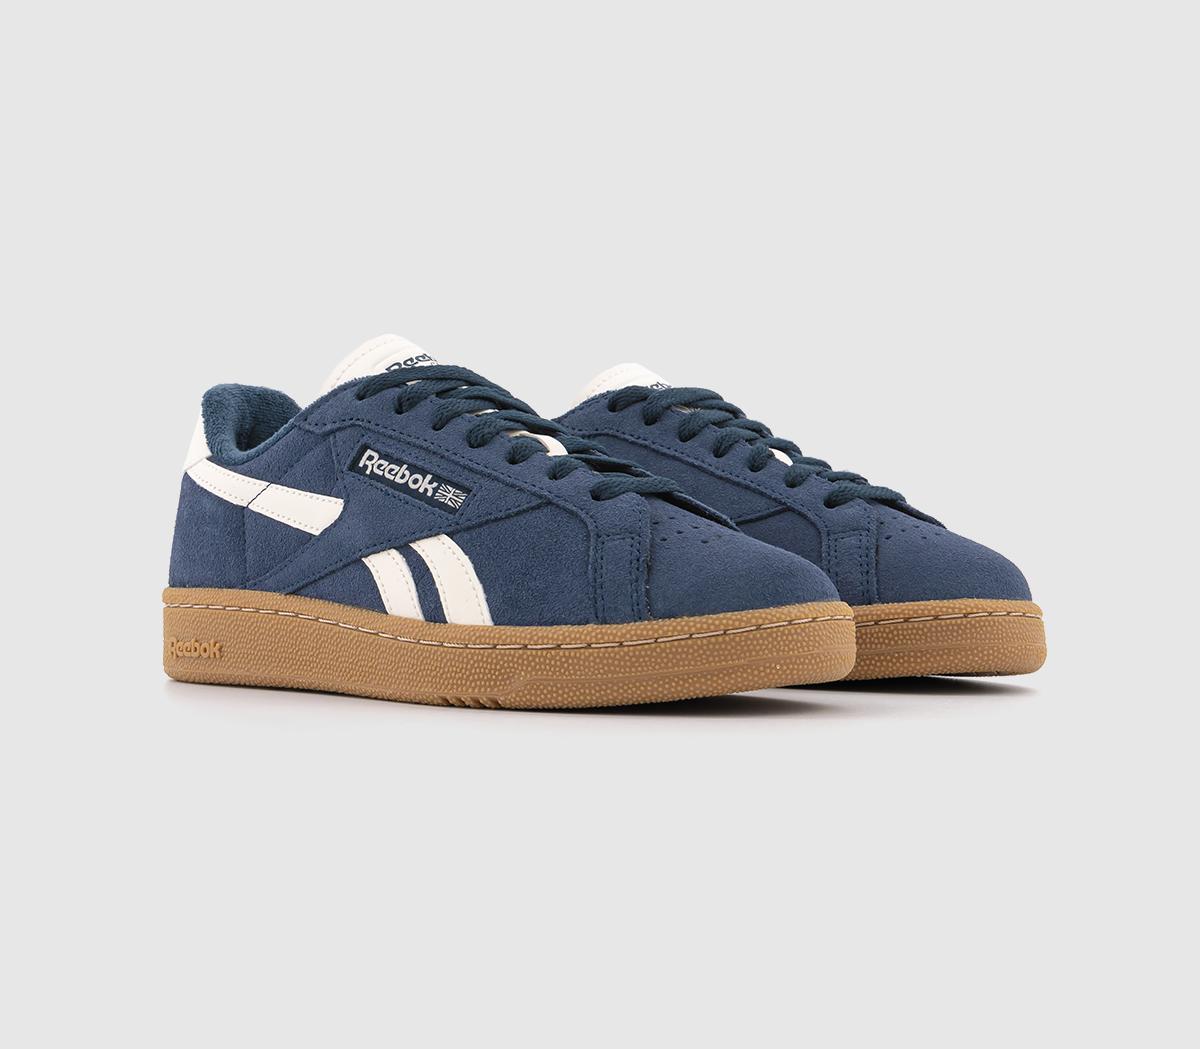 Reebok Womens Club C Grounds Trainers Vector Navy Blue, 9